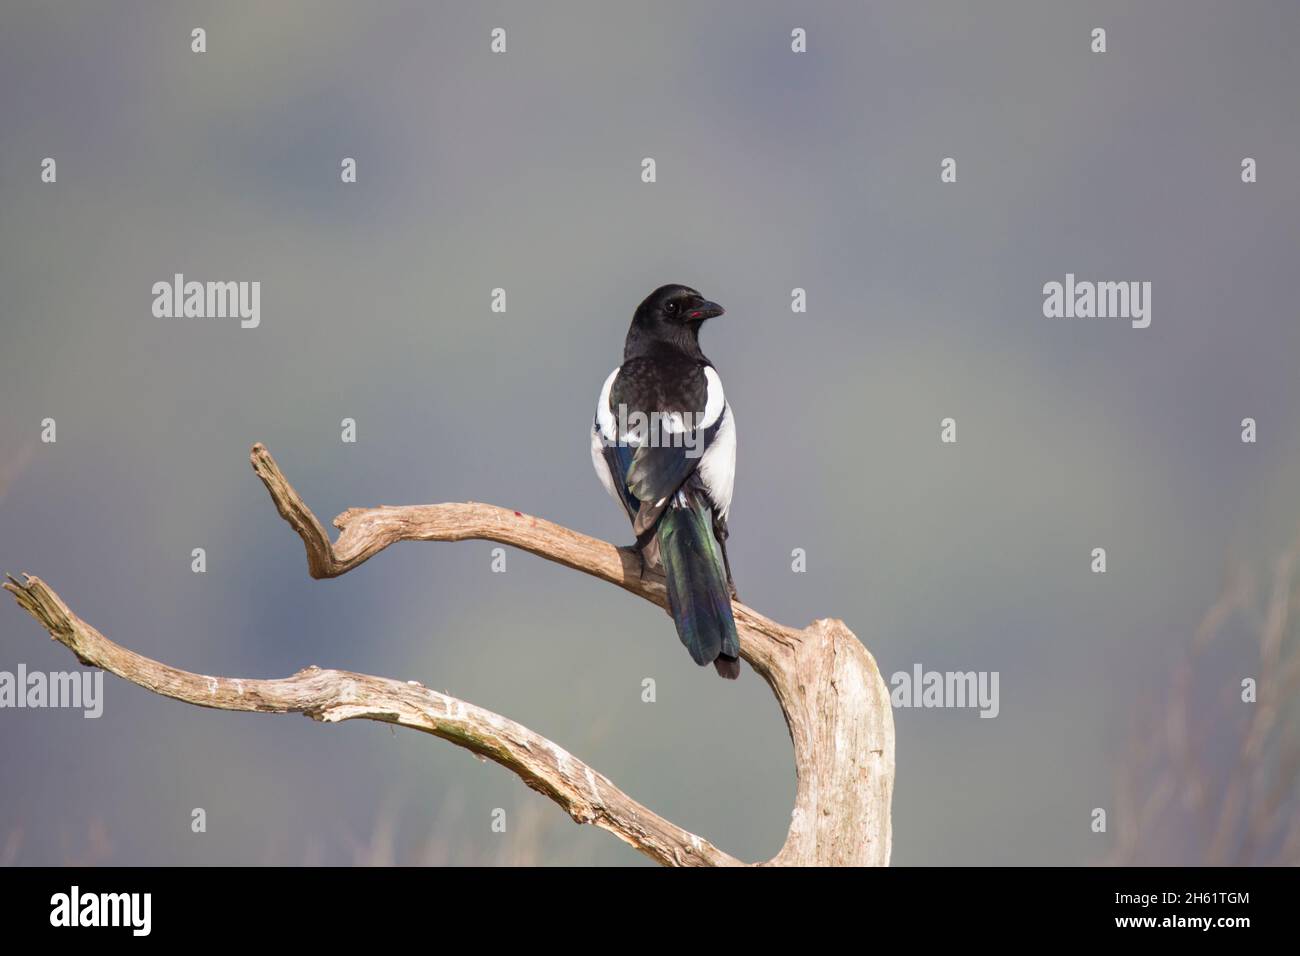 Elster, Pica pica, Eurasian magpie Stock Photo